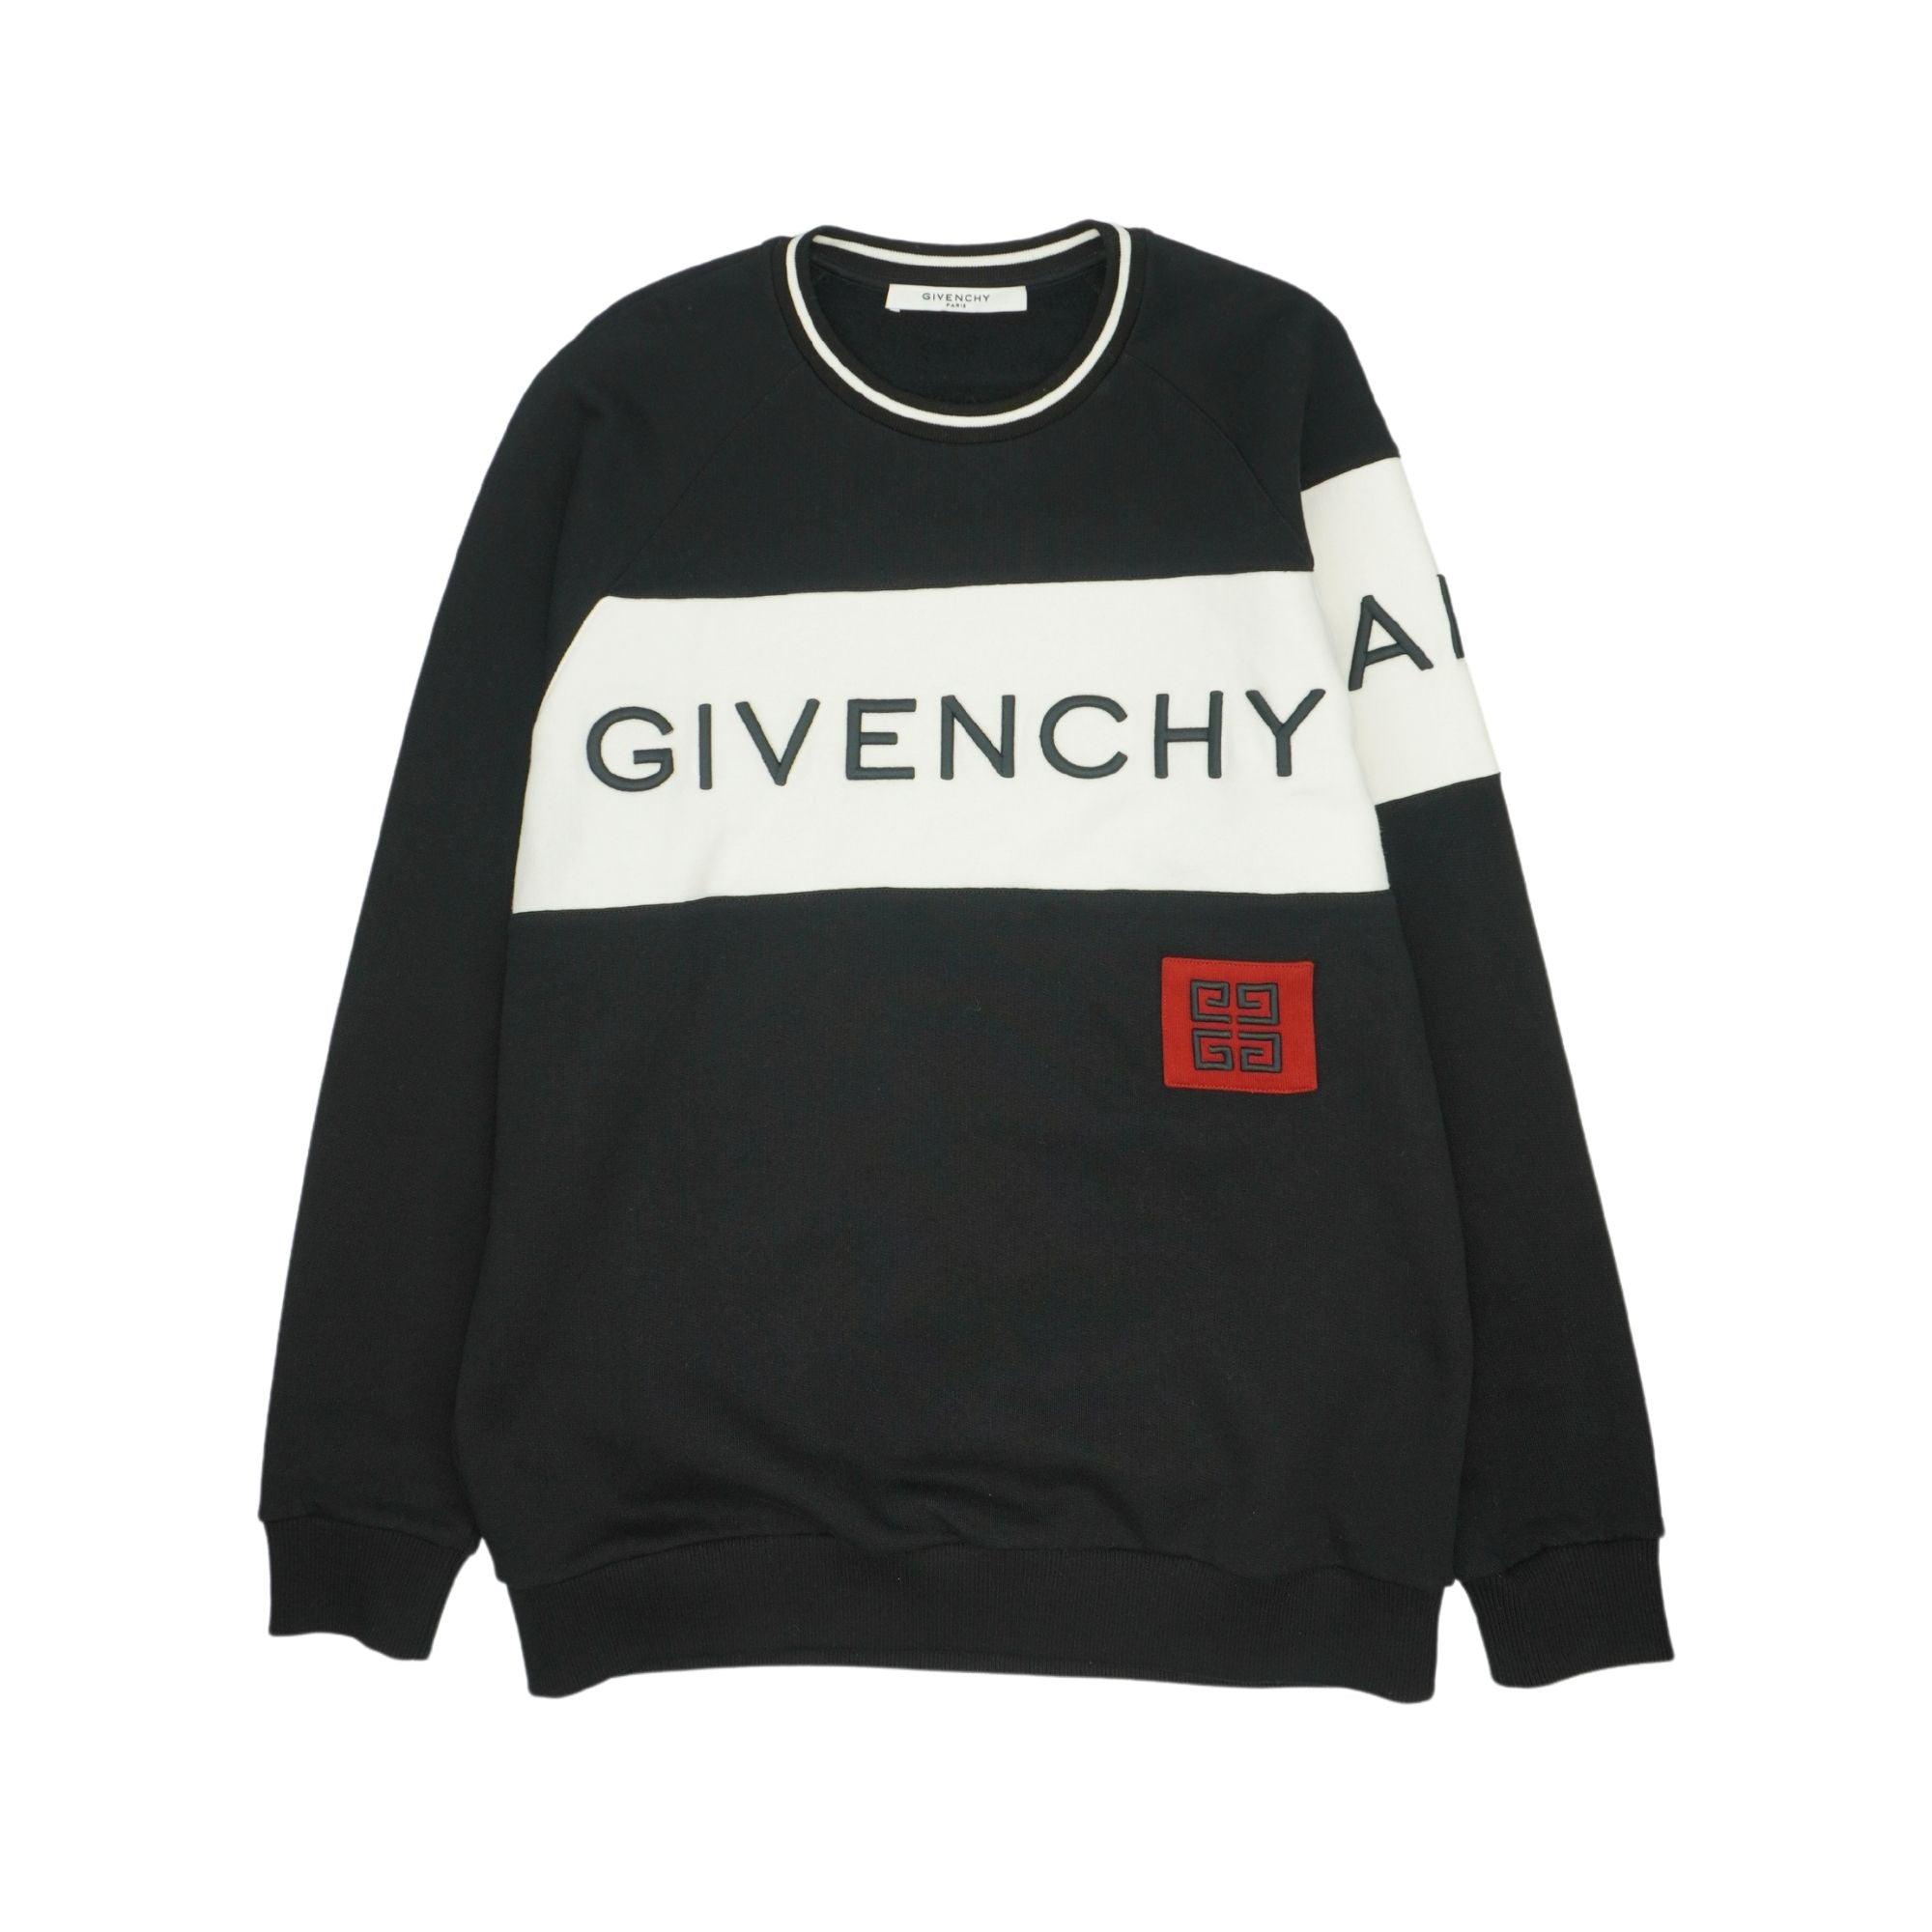 Givenchy Sweater - Men's S - Fashionably Yours